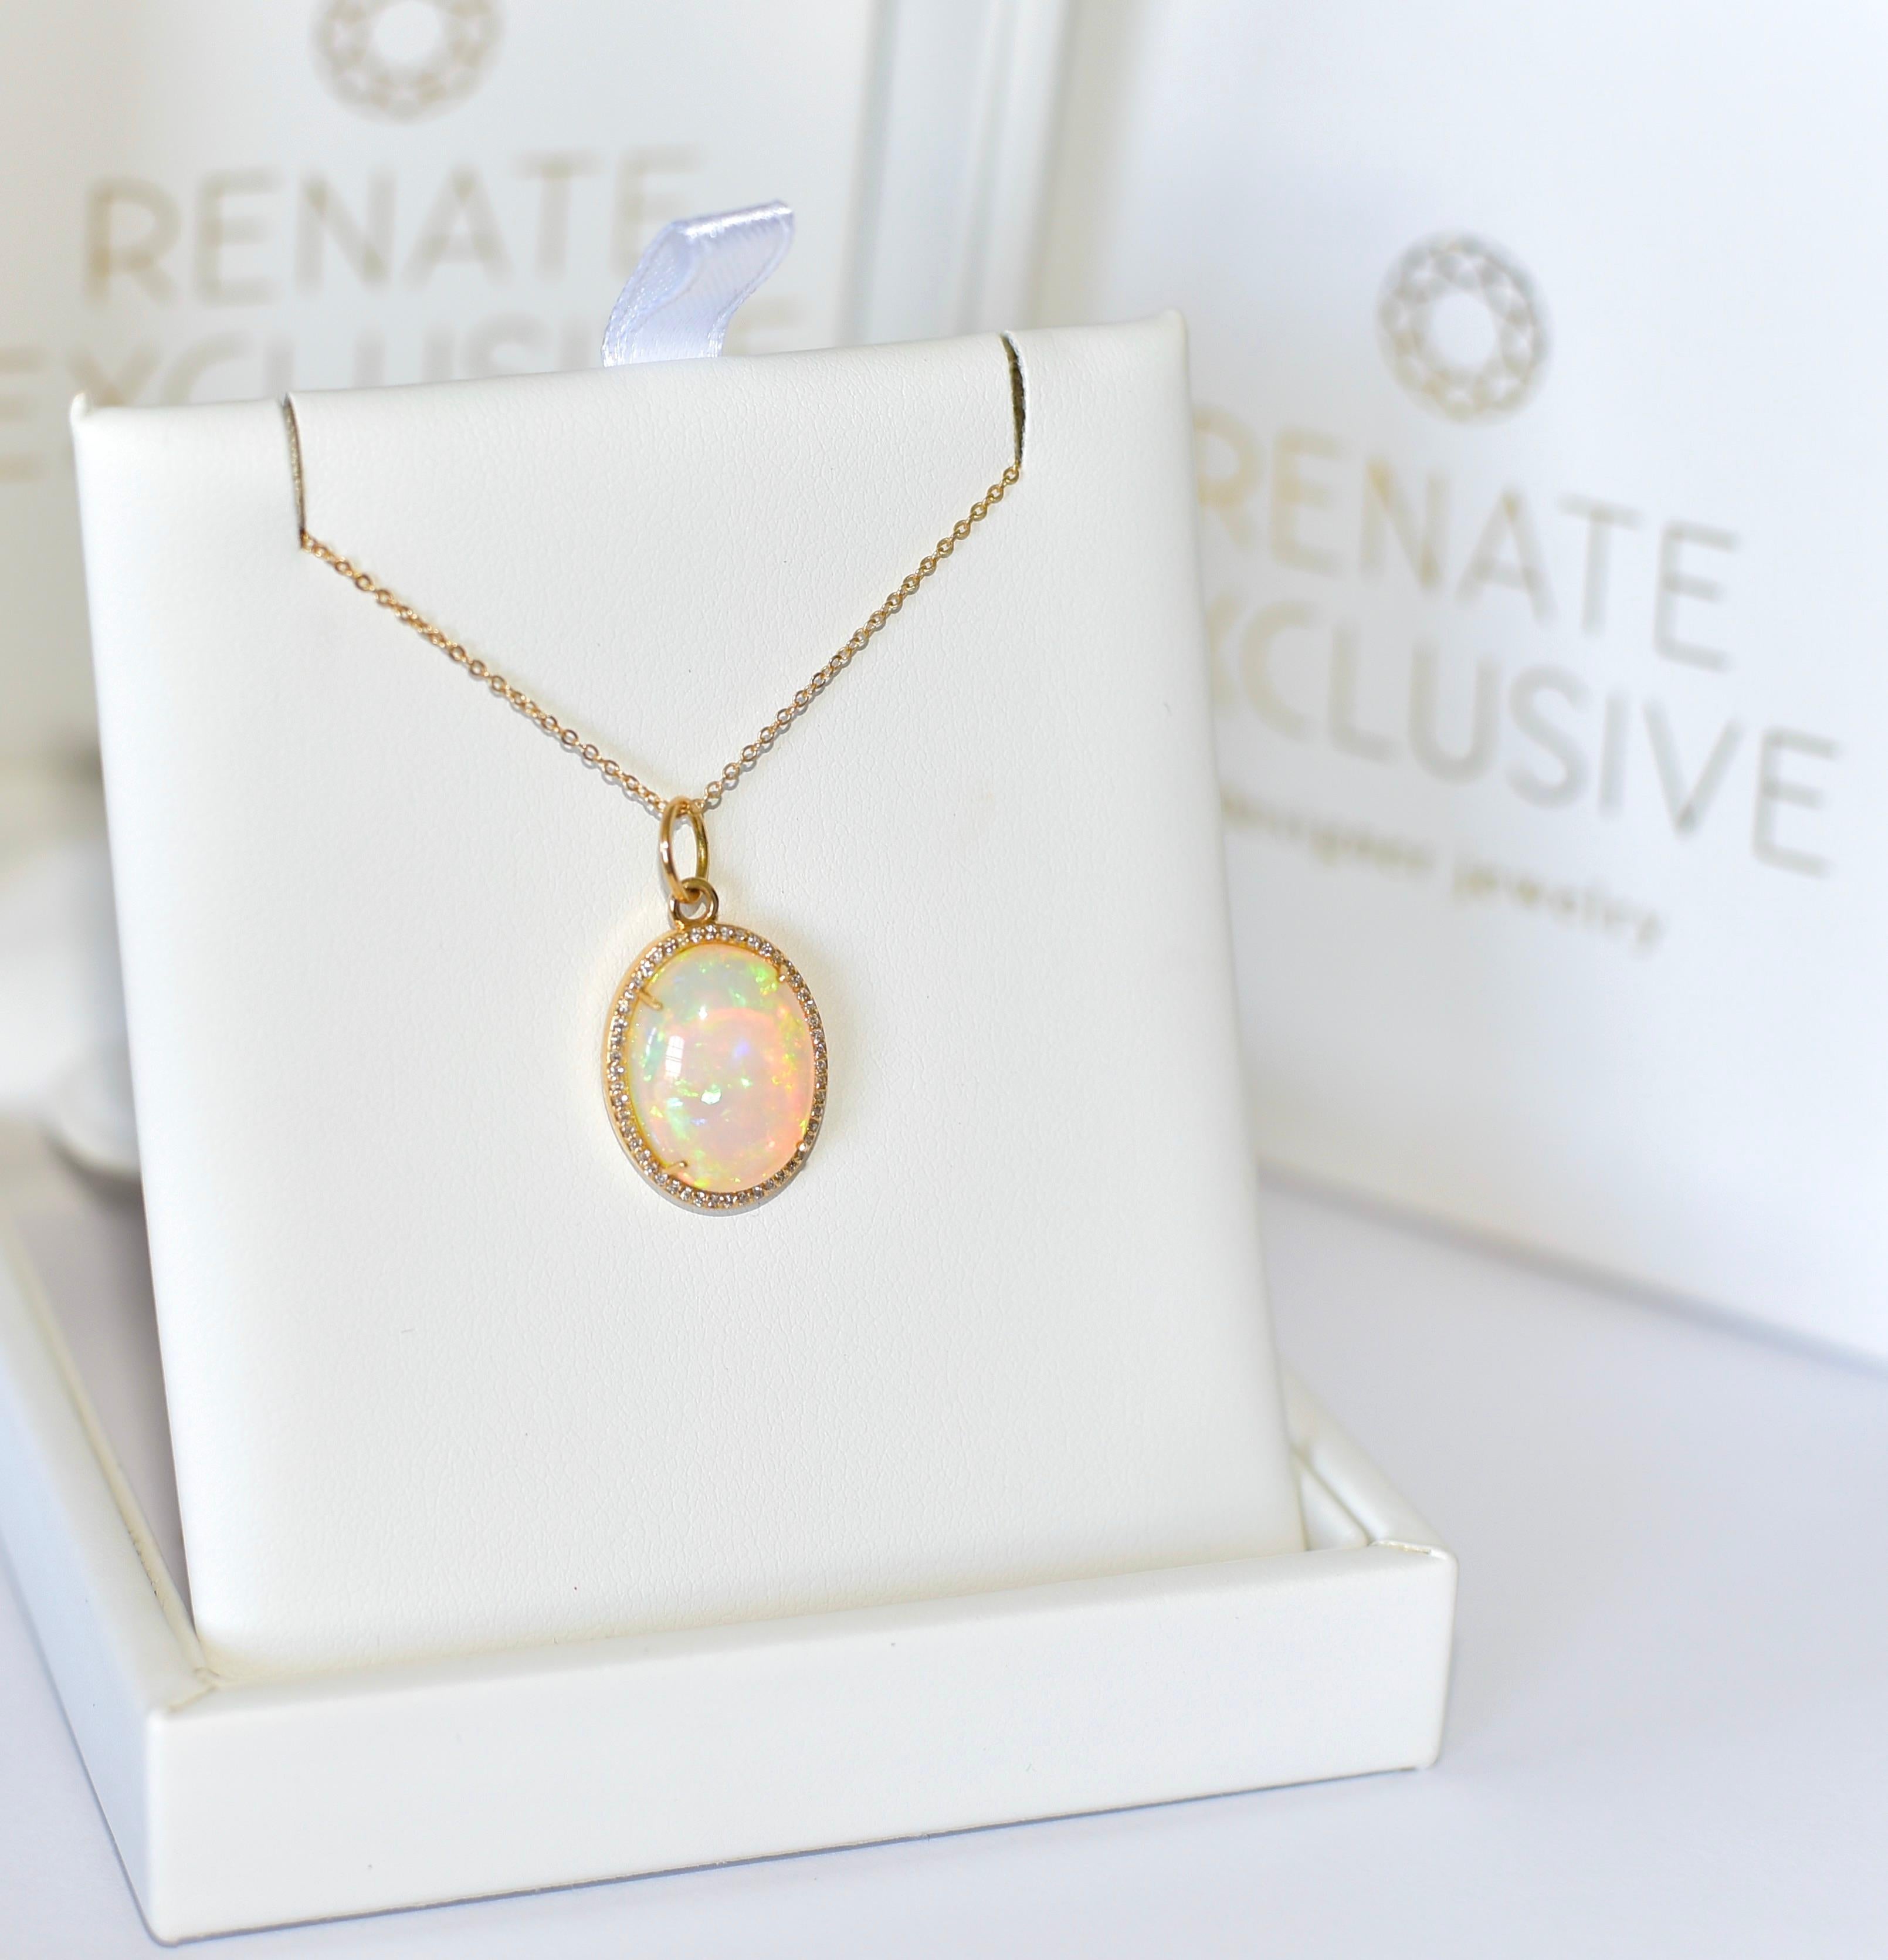 
Elegant and opulent! Opal is always a semi-precious stone that you will not be disappointed with! Spectacular 14k solid yellow gold pendant made up of 6.11 carats gem Opal in a classy oval shape. The pendant also has a 0.17-carat fine diamond